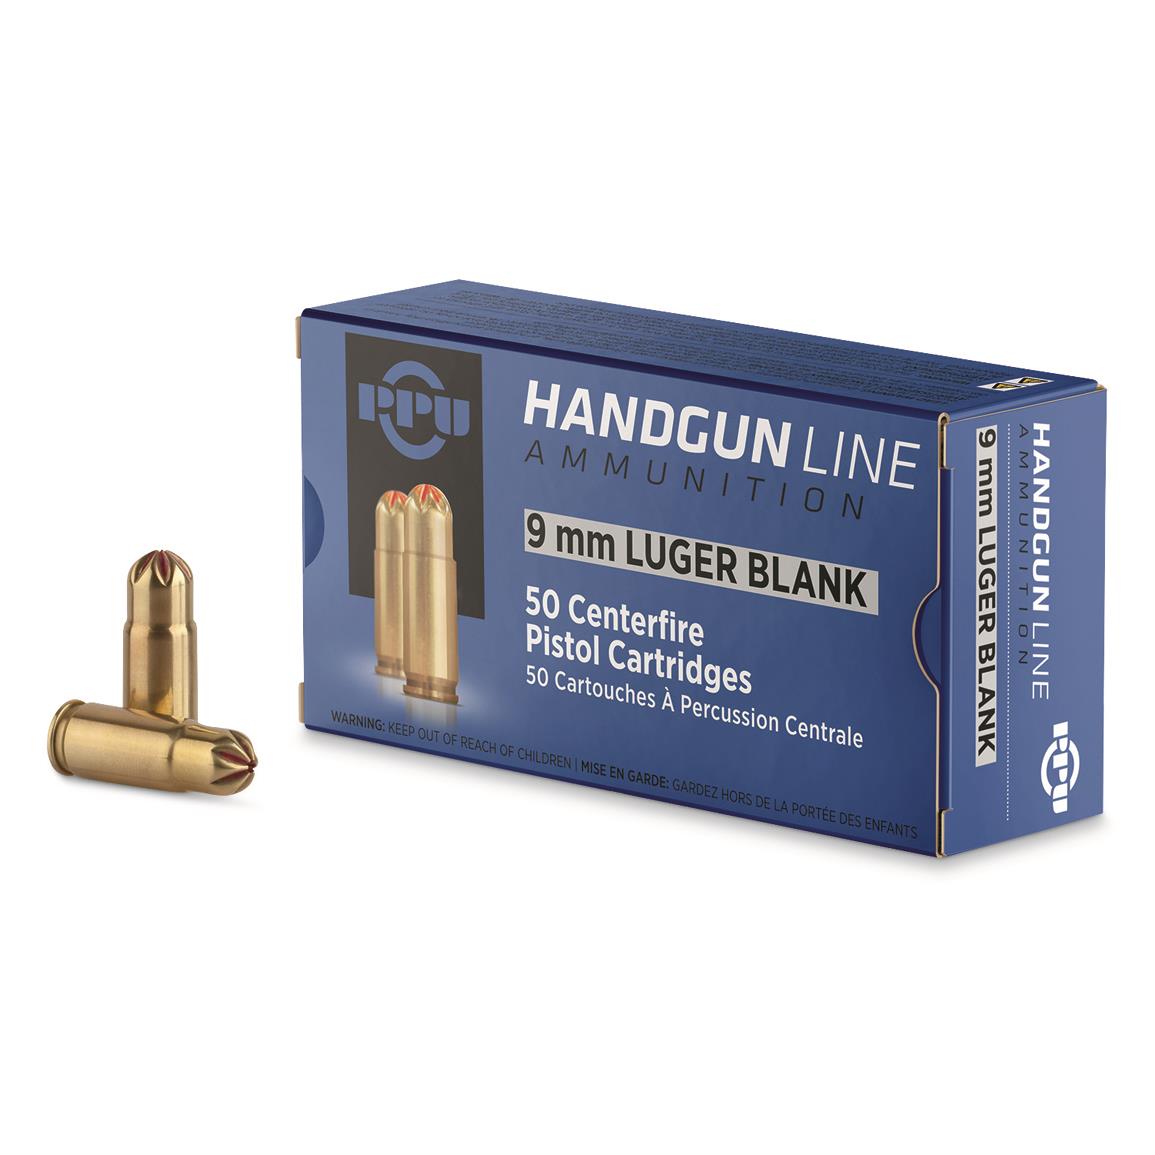 Ppu 9mm Standard Blank Ammo 50 Rounds 222527 9mm Ammo At Sportsman S Guide